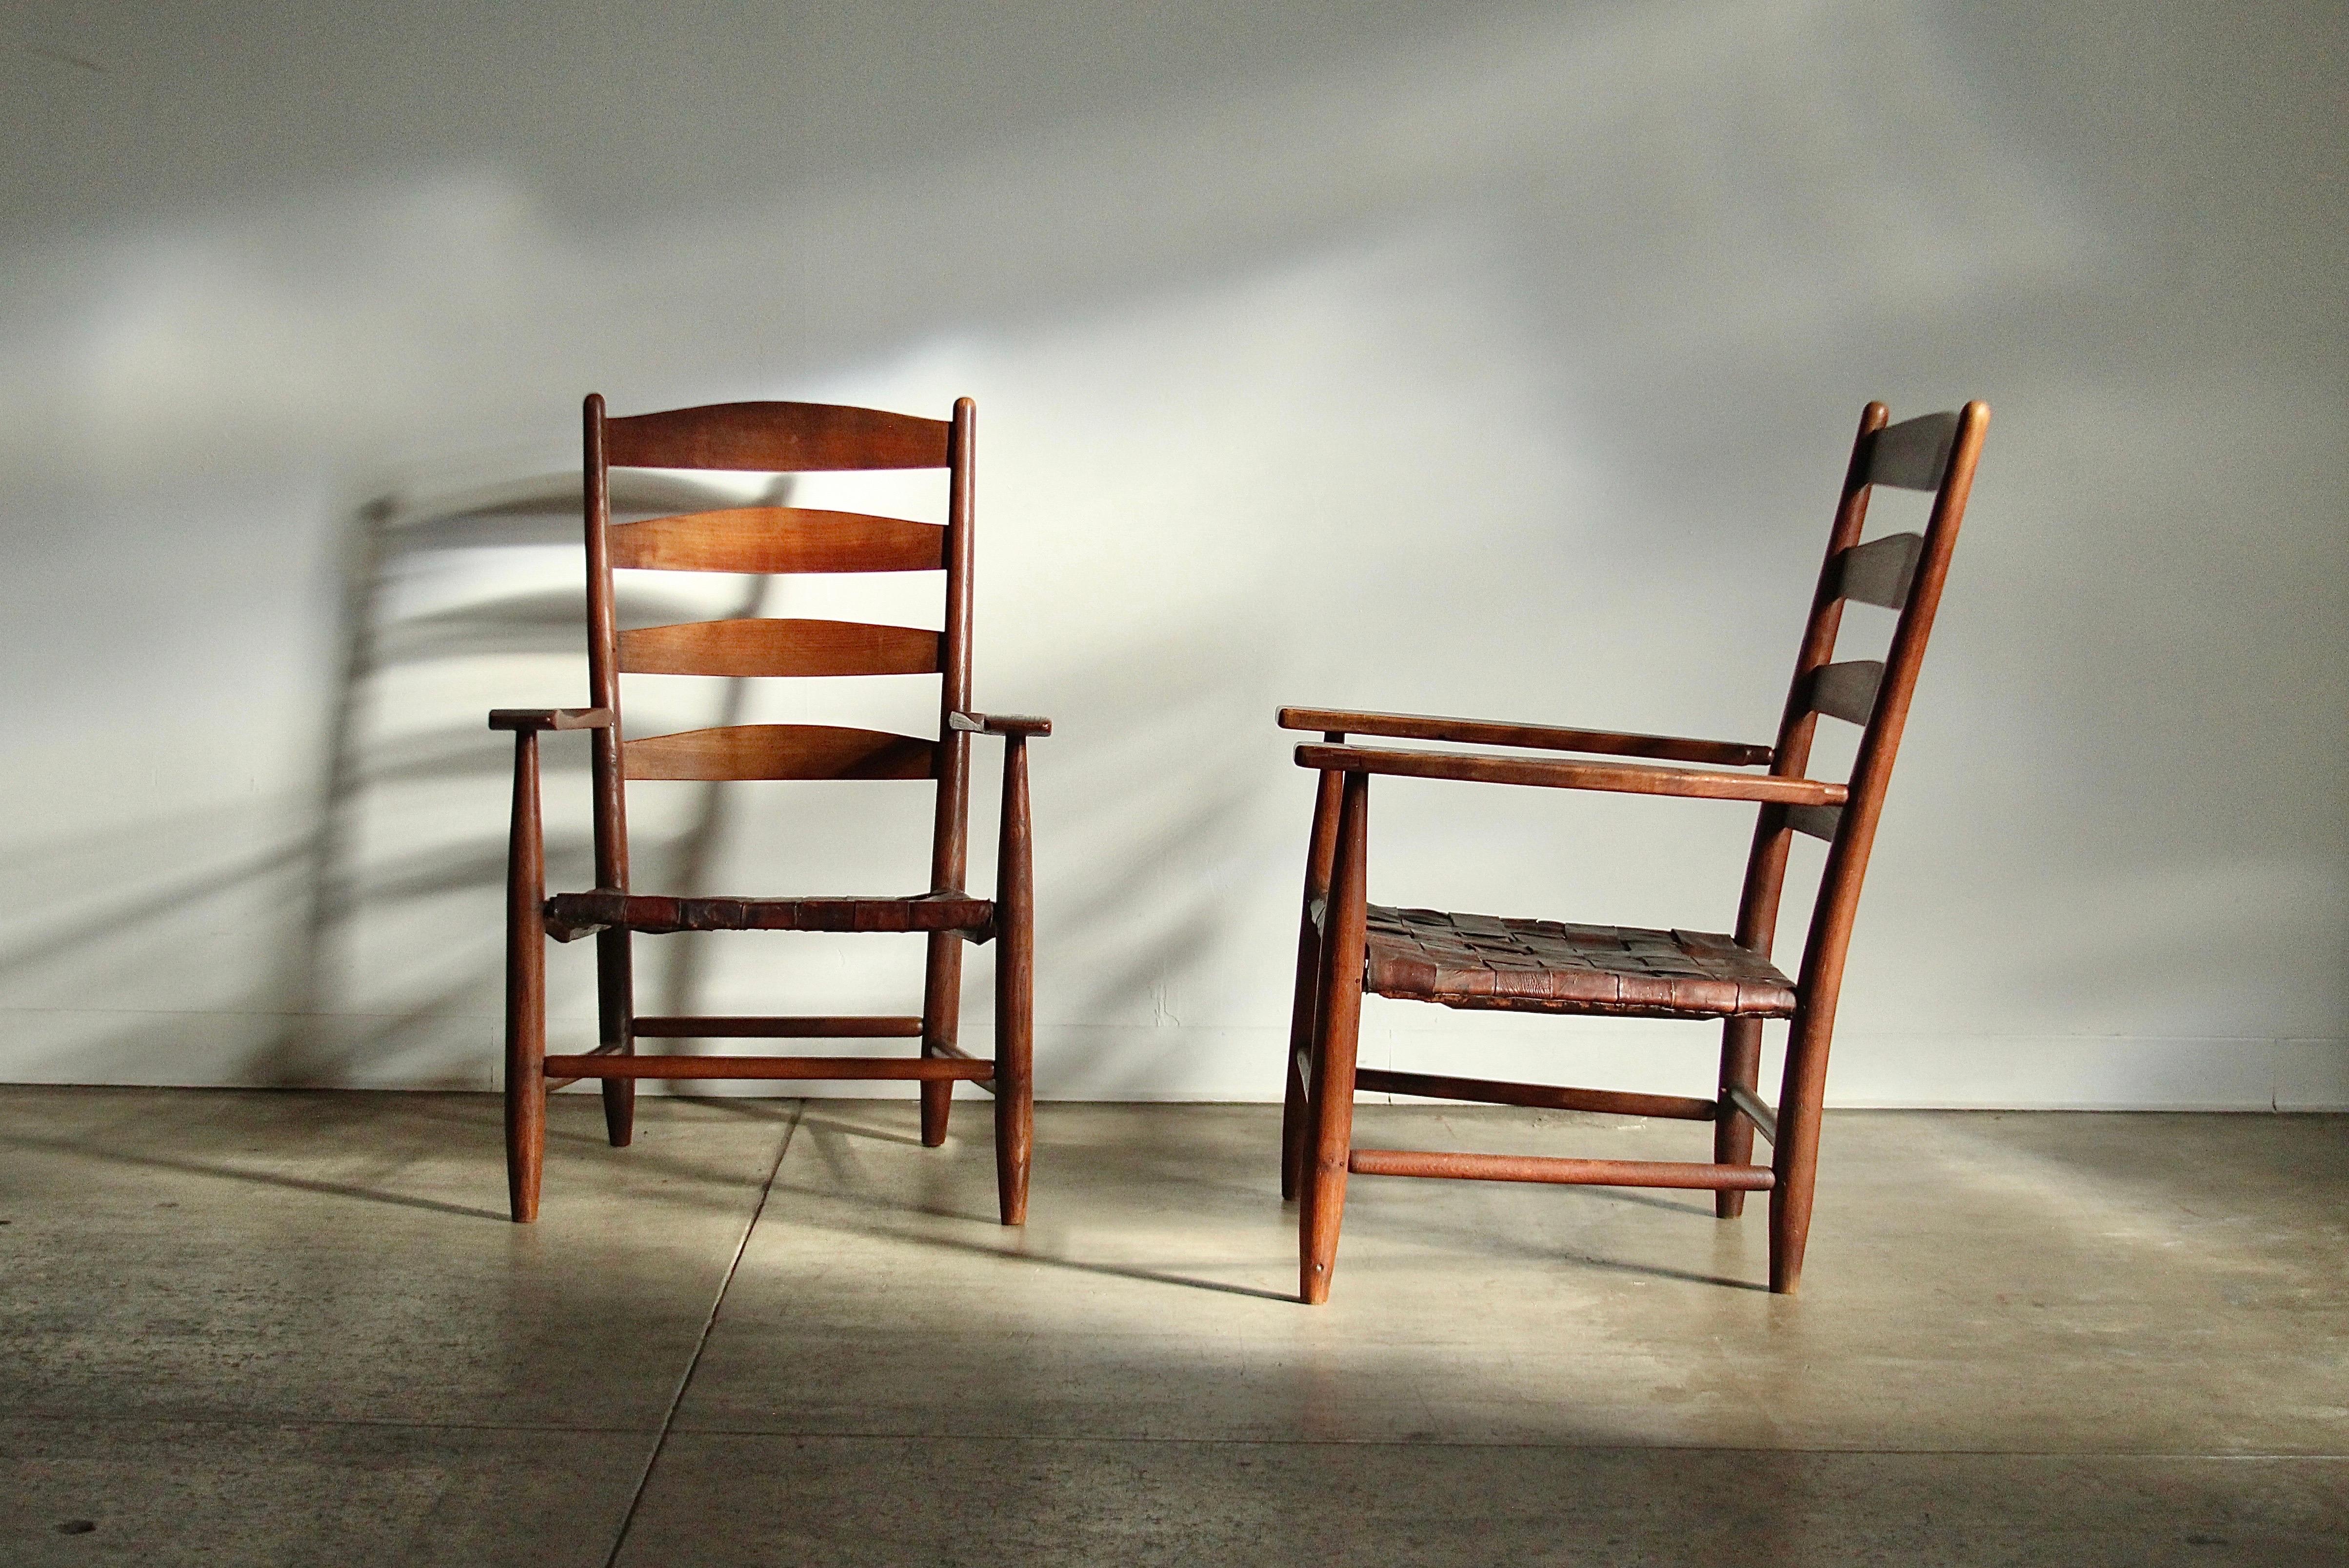 Shaker Gordon Russell Hand Built Ladder Back Oak & Woven Leather Lounge Chairs, 1904 For Sale